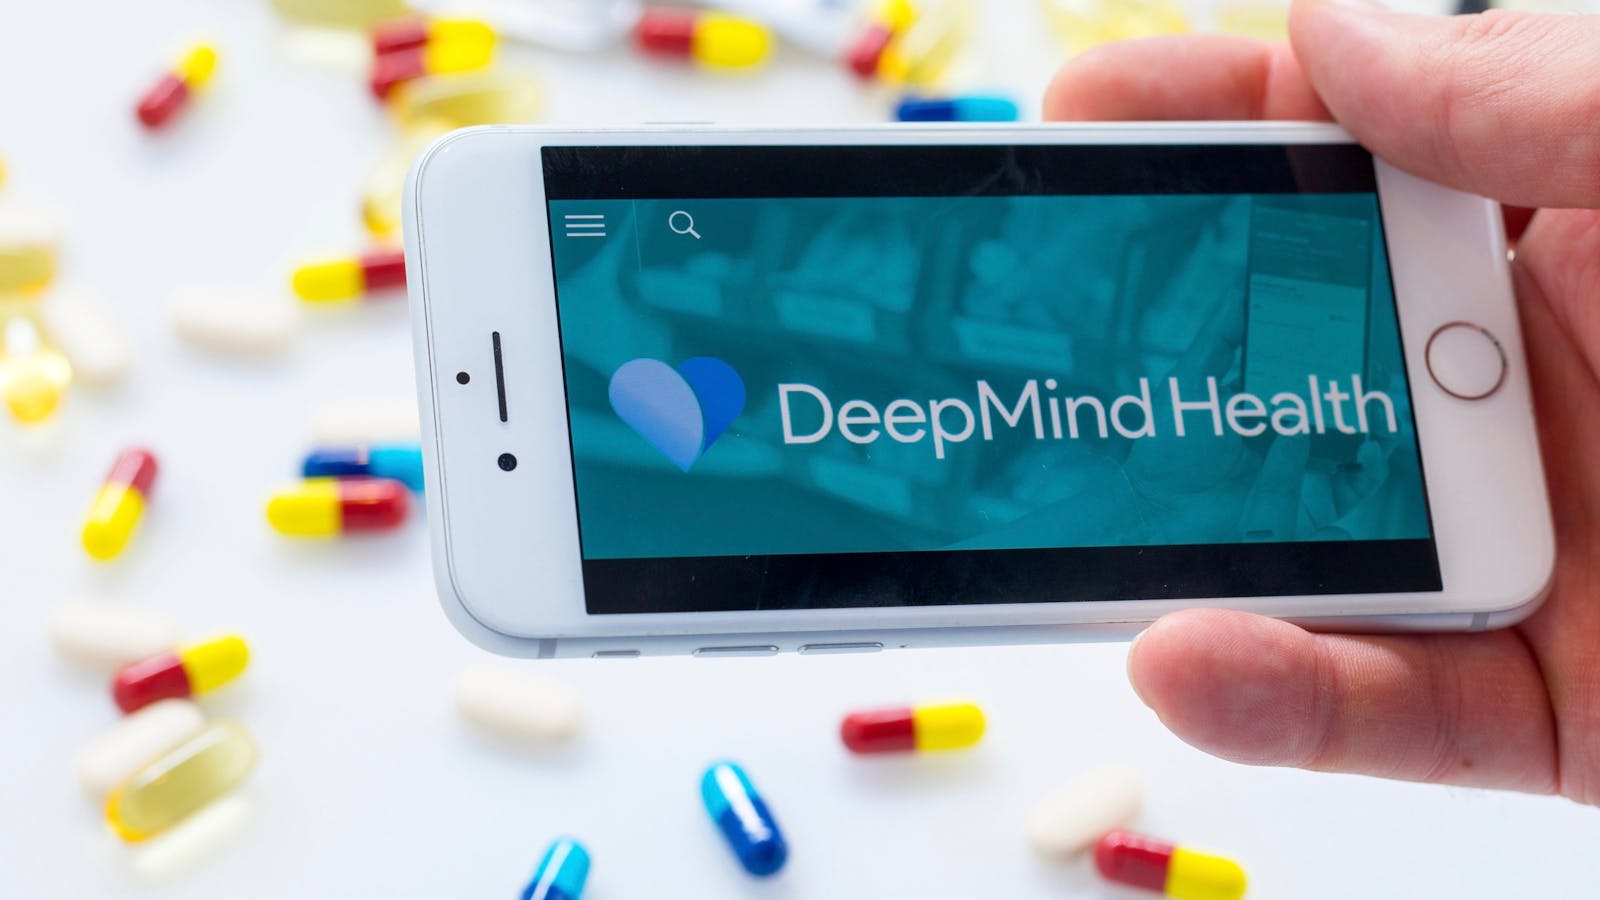 Google's Deepmind Health logo on a smartphone. Photo by Bloomberg